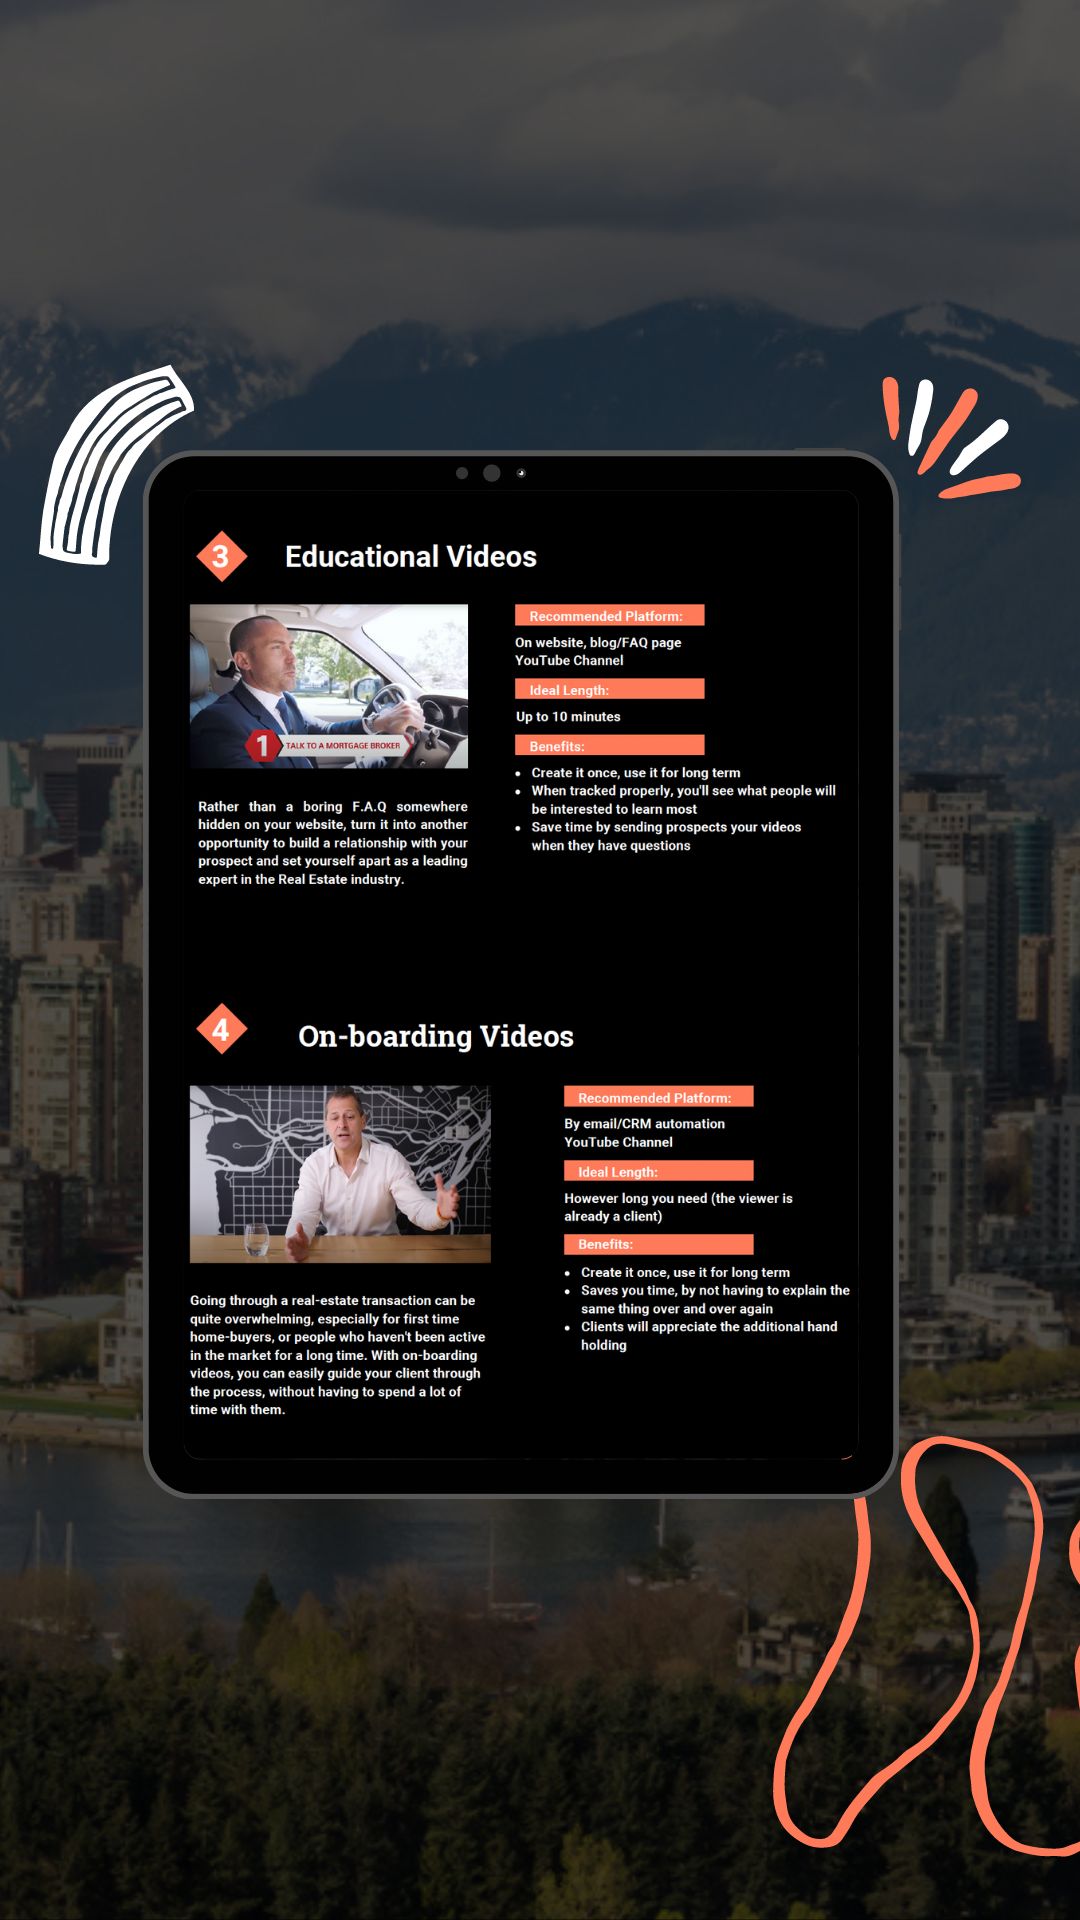 Tablet wiht image of video guide for realtors